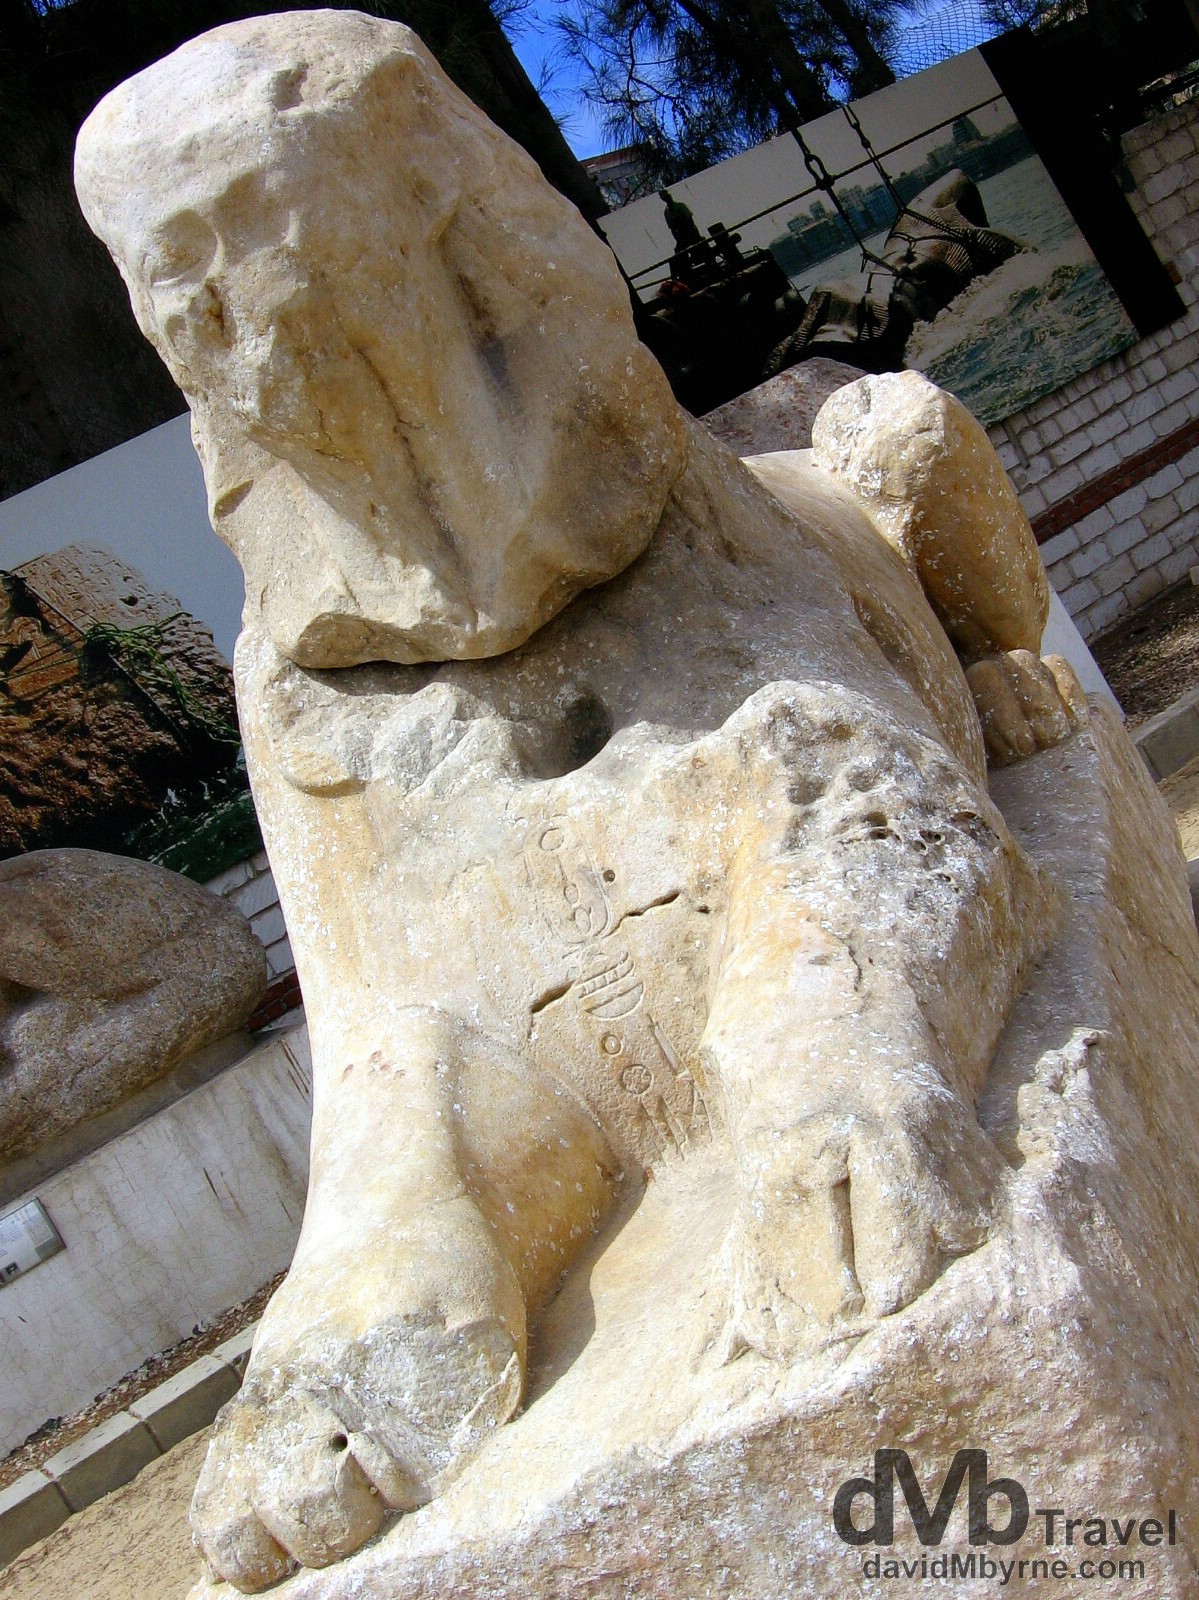 A water worn Sphinx on display in the grounds of the Roman Amphitheater in Alexandria, Egypt. April 16, 2008.